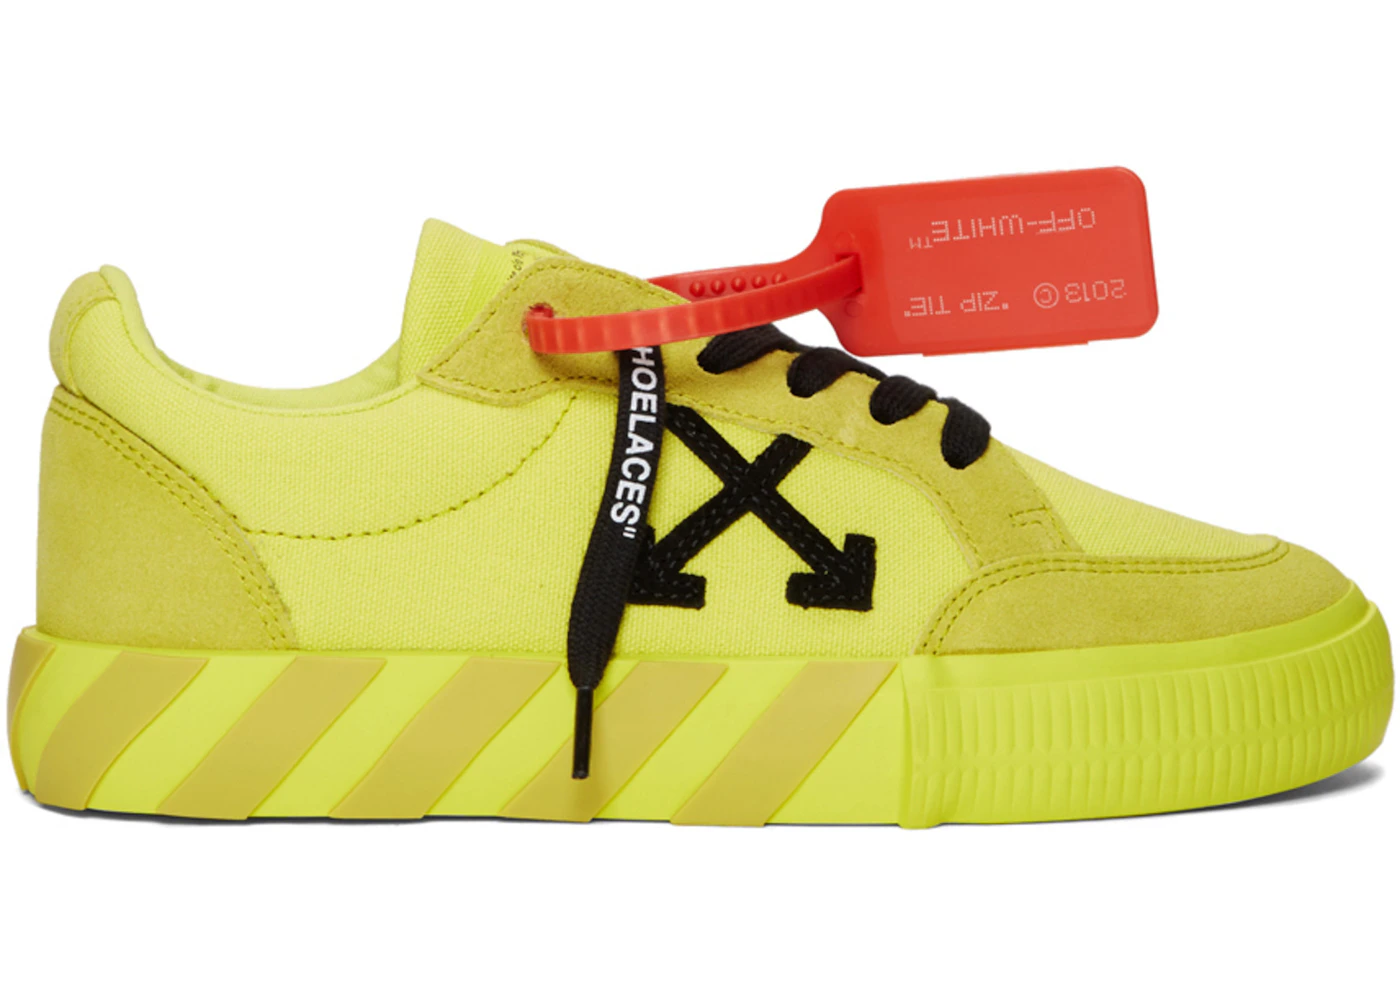 OFF-WHITE Vulc Low Yellow Canvas FW19 (Women's) - 192607F128027 - US